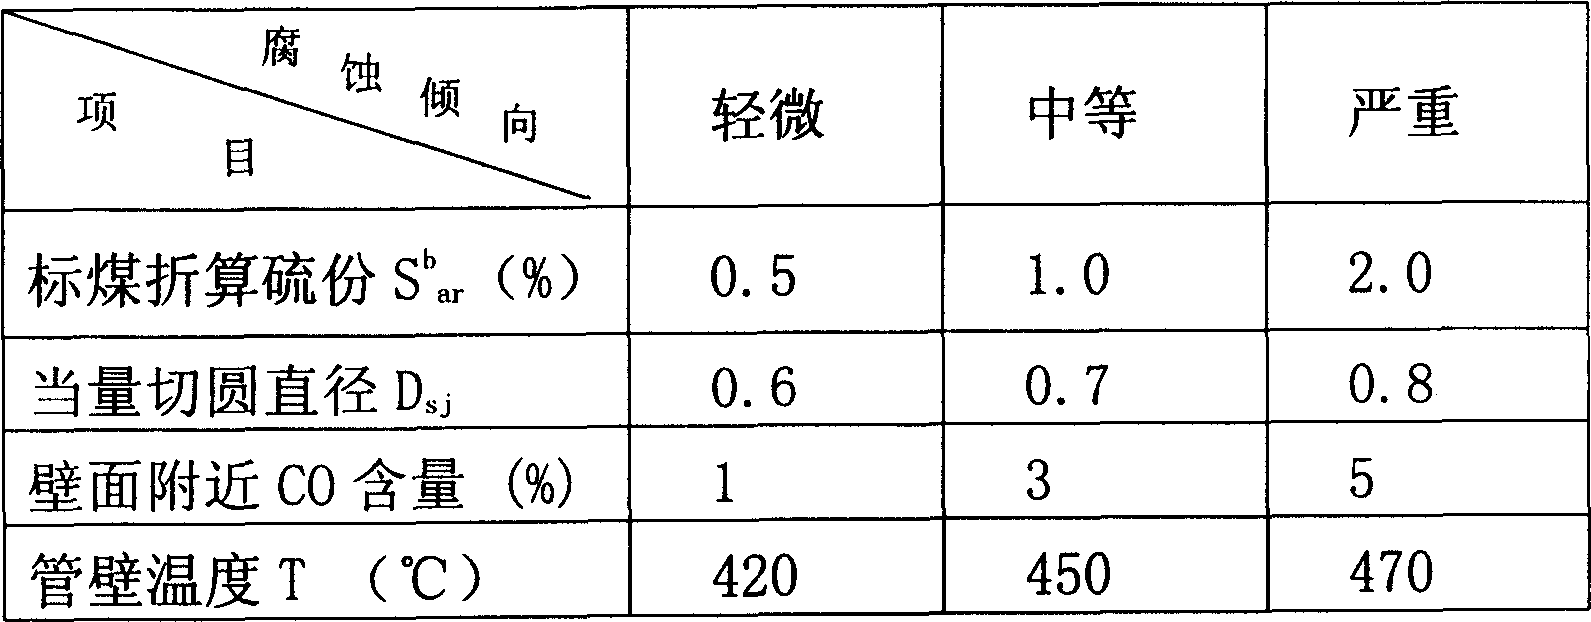 Judgment method for high temperature corrosion degree of boiler water cooling wall in large power station